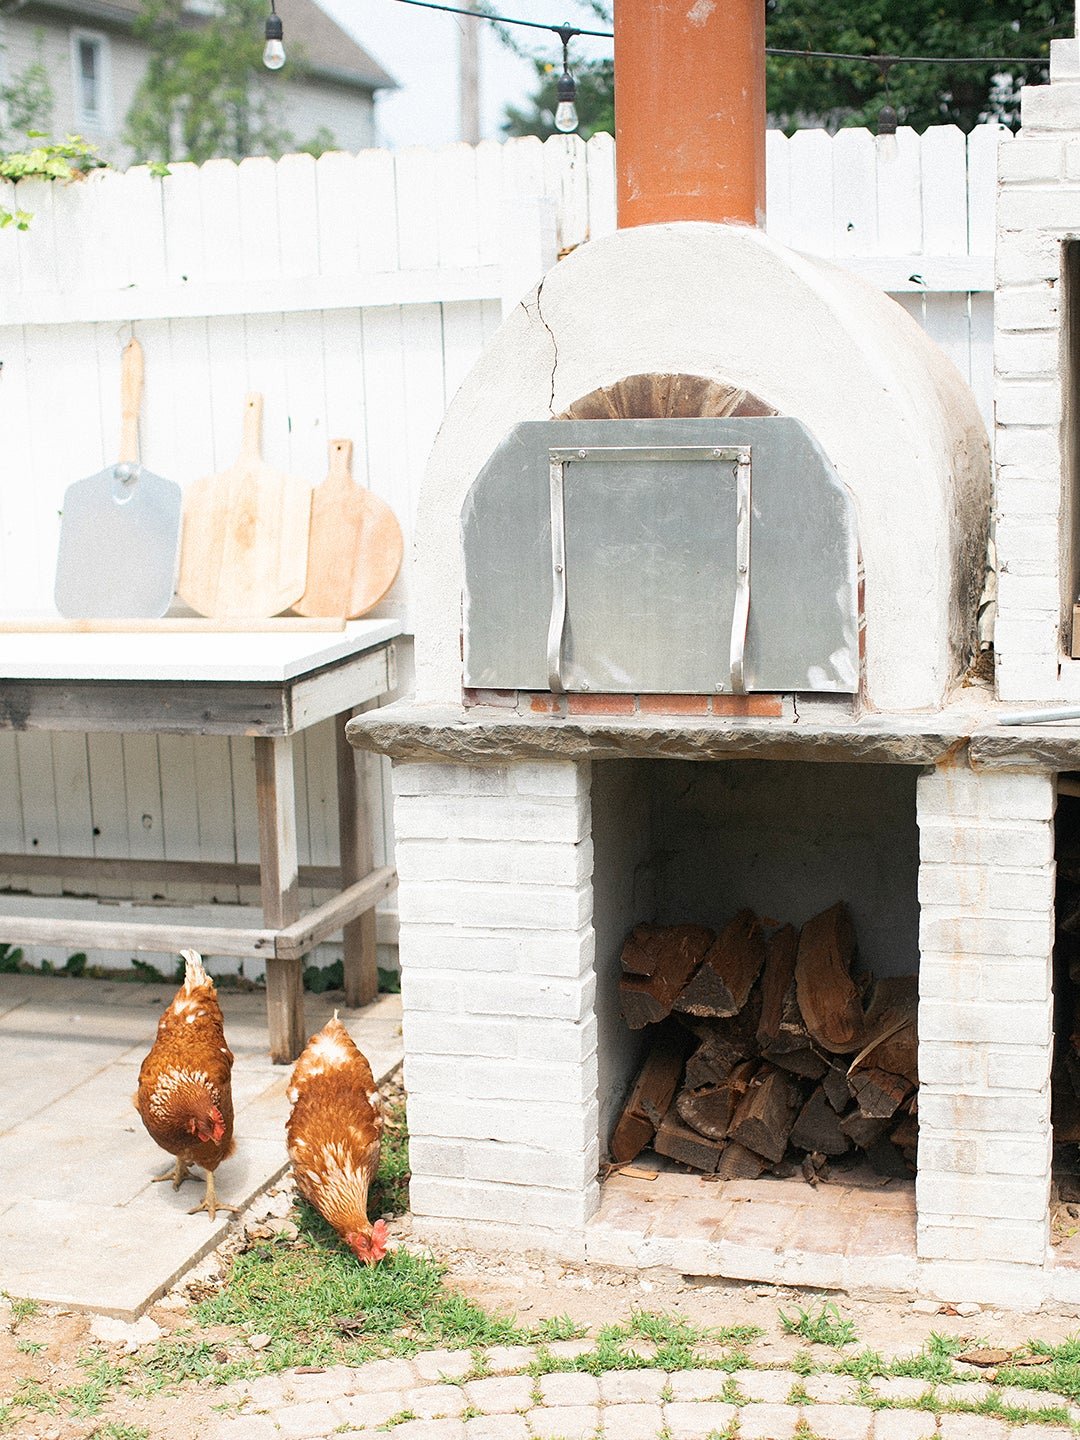 Why a Family Traded Their Grill for This Next-Level Outdoor Kitchen